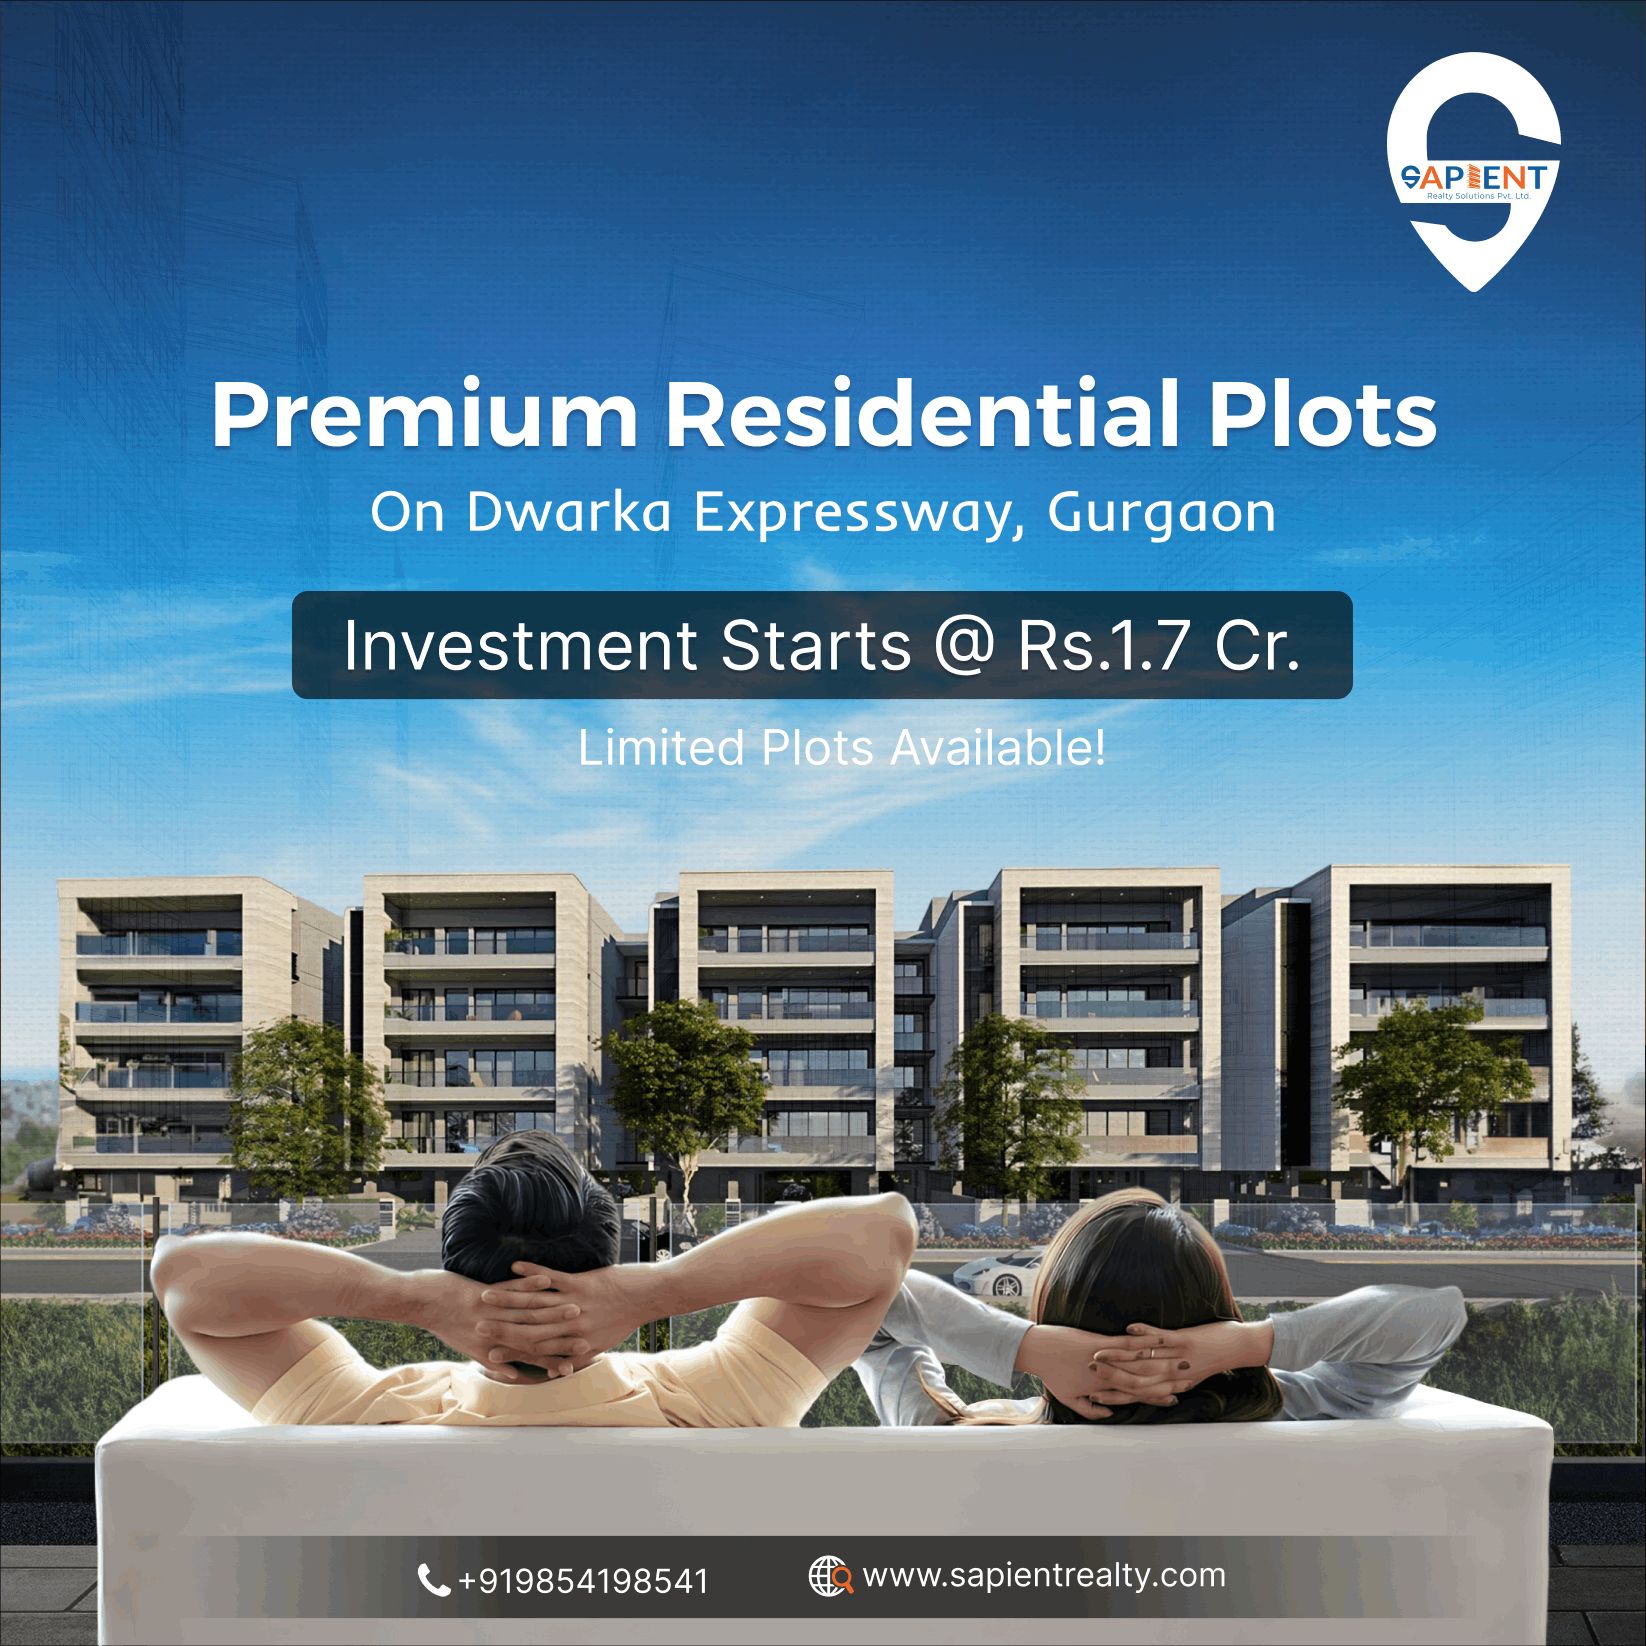 3 Bed/ 3 Bath Sell Apartment/ Flat; 3,000 sq. ft. carpet area for sale @Sector 89, Gurgaon